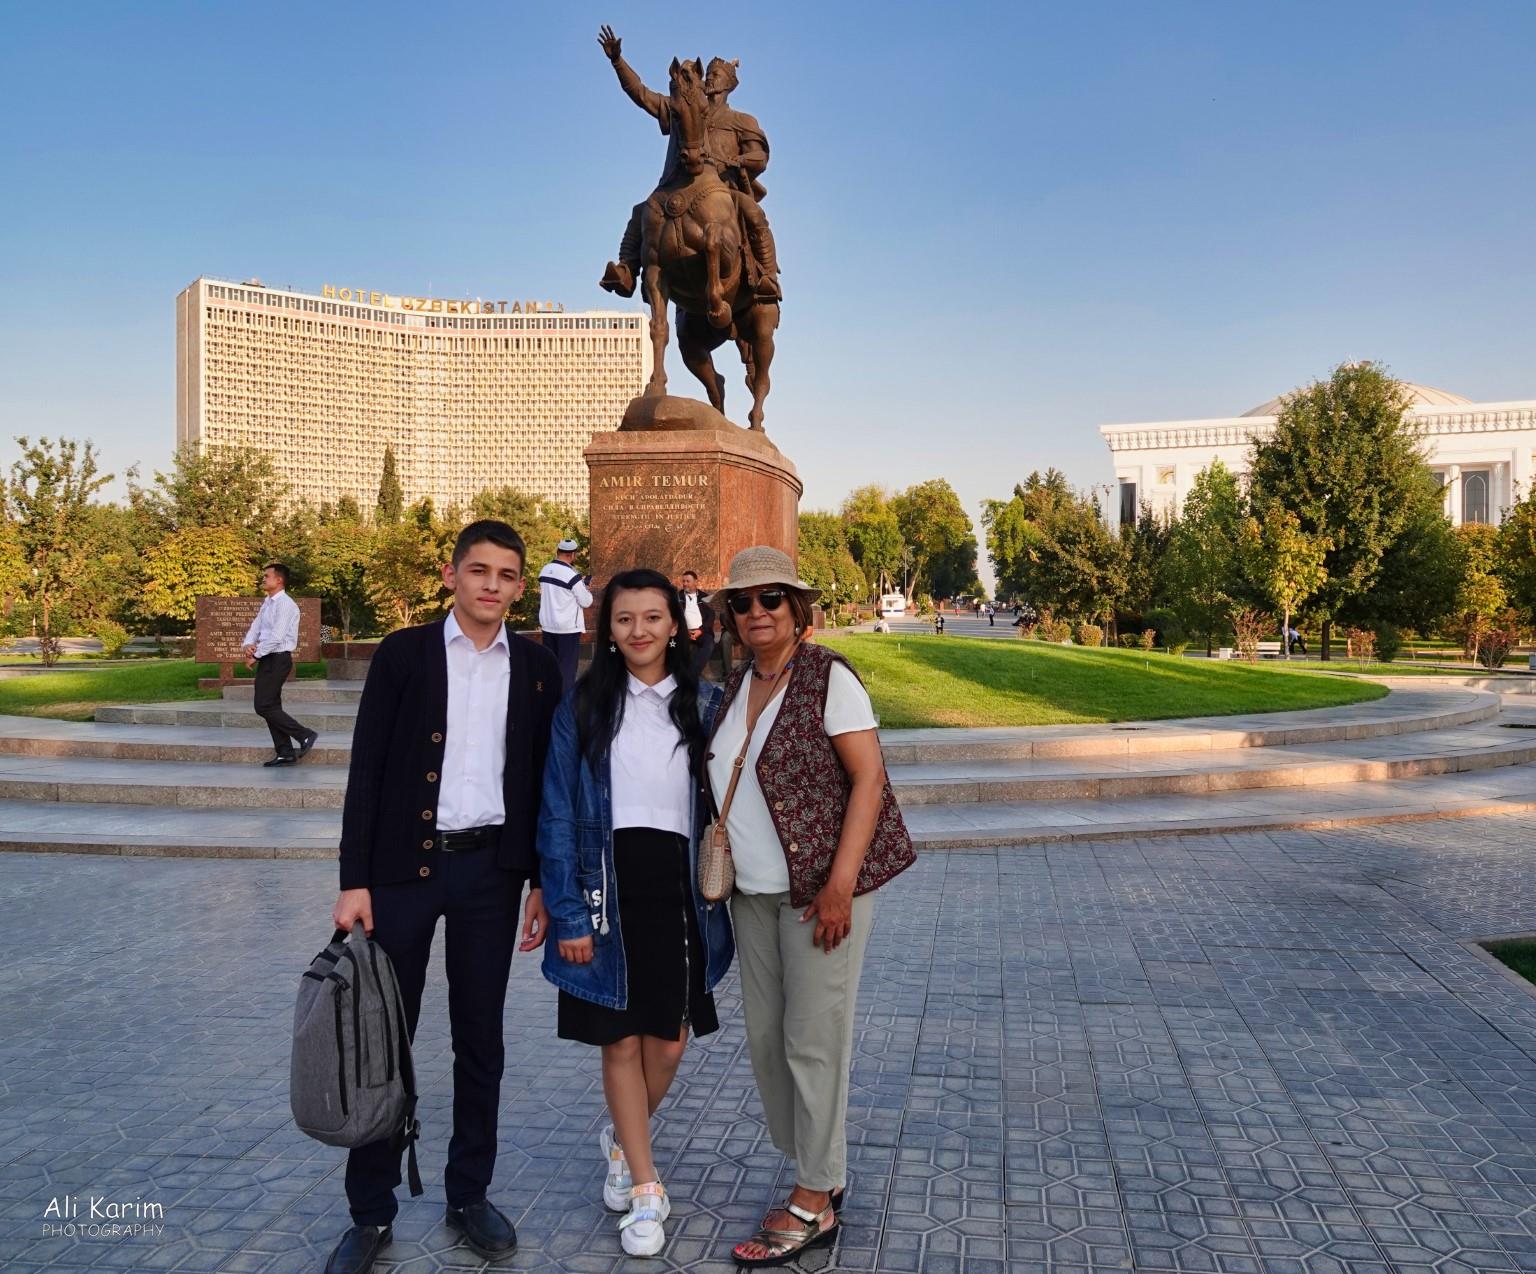 Tashkent, Oct 2019, With our wonderful student guide friends, Khoumayoun and Sharada